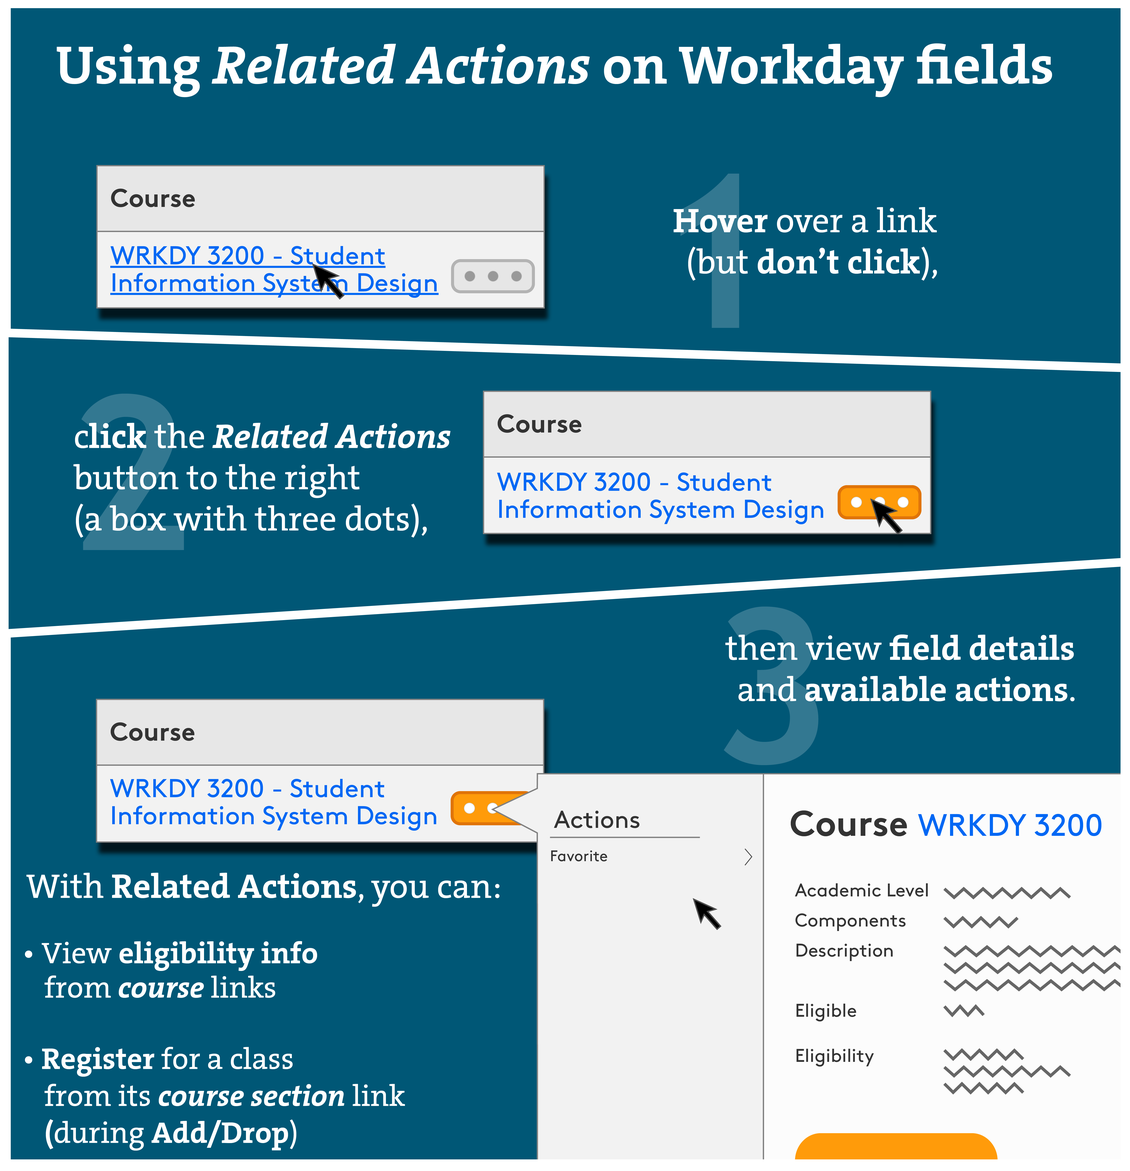 Related Actions Quick Guide_v2@2x.png